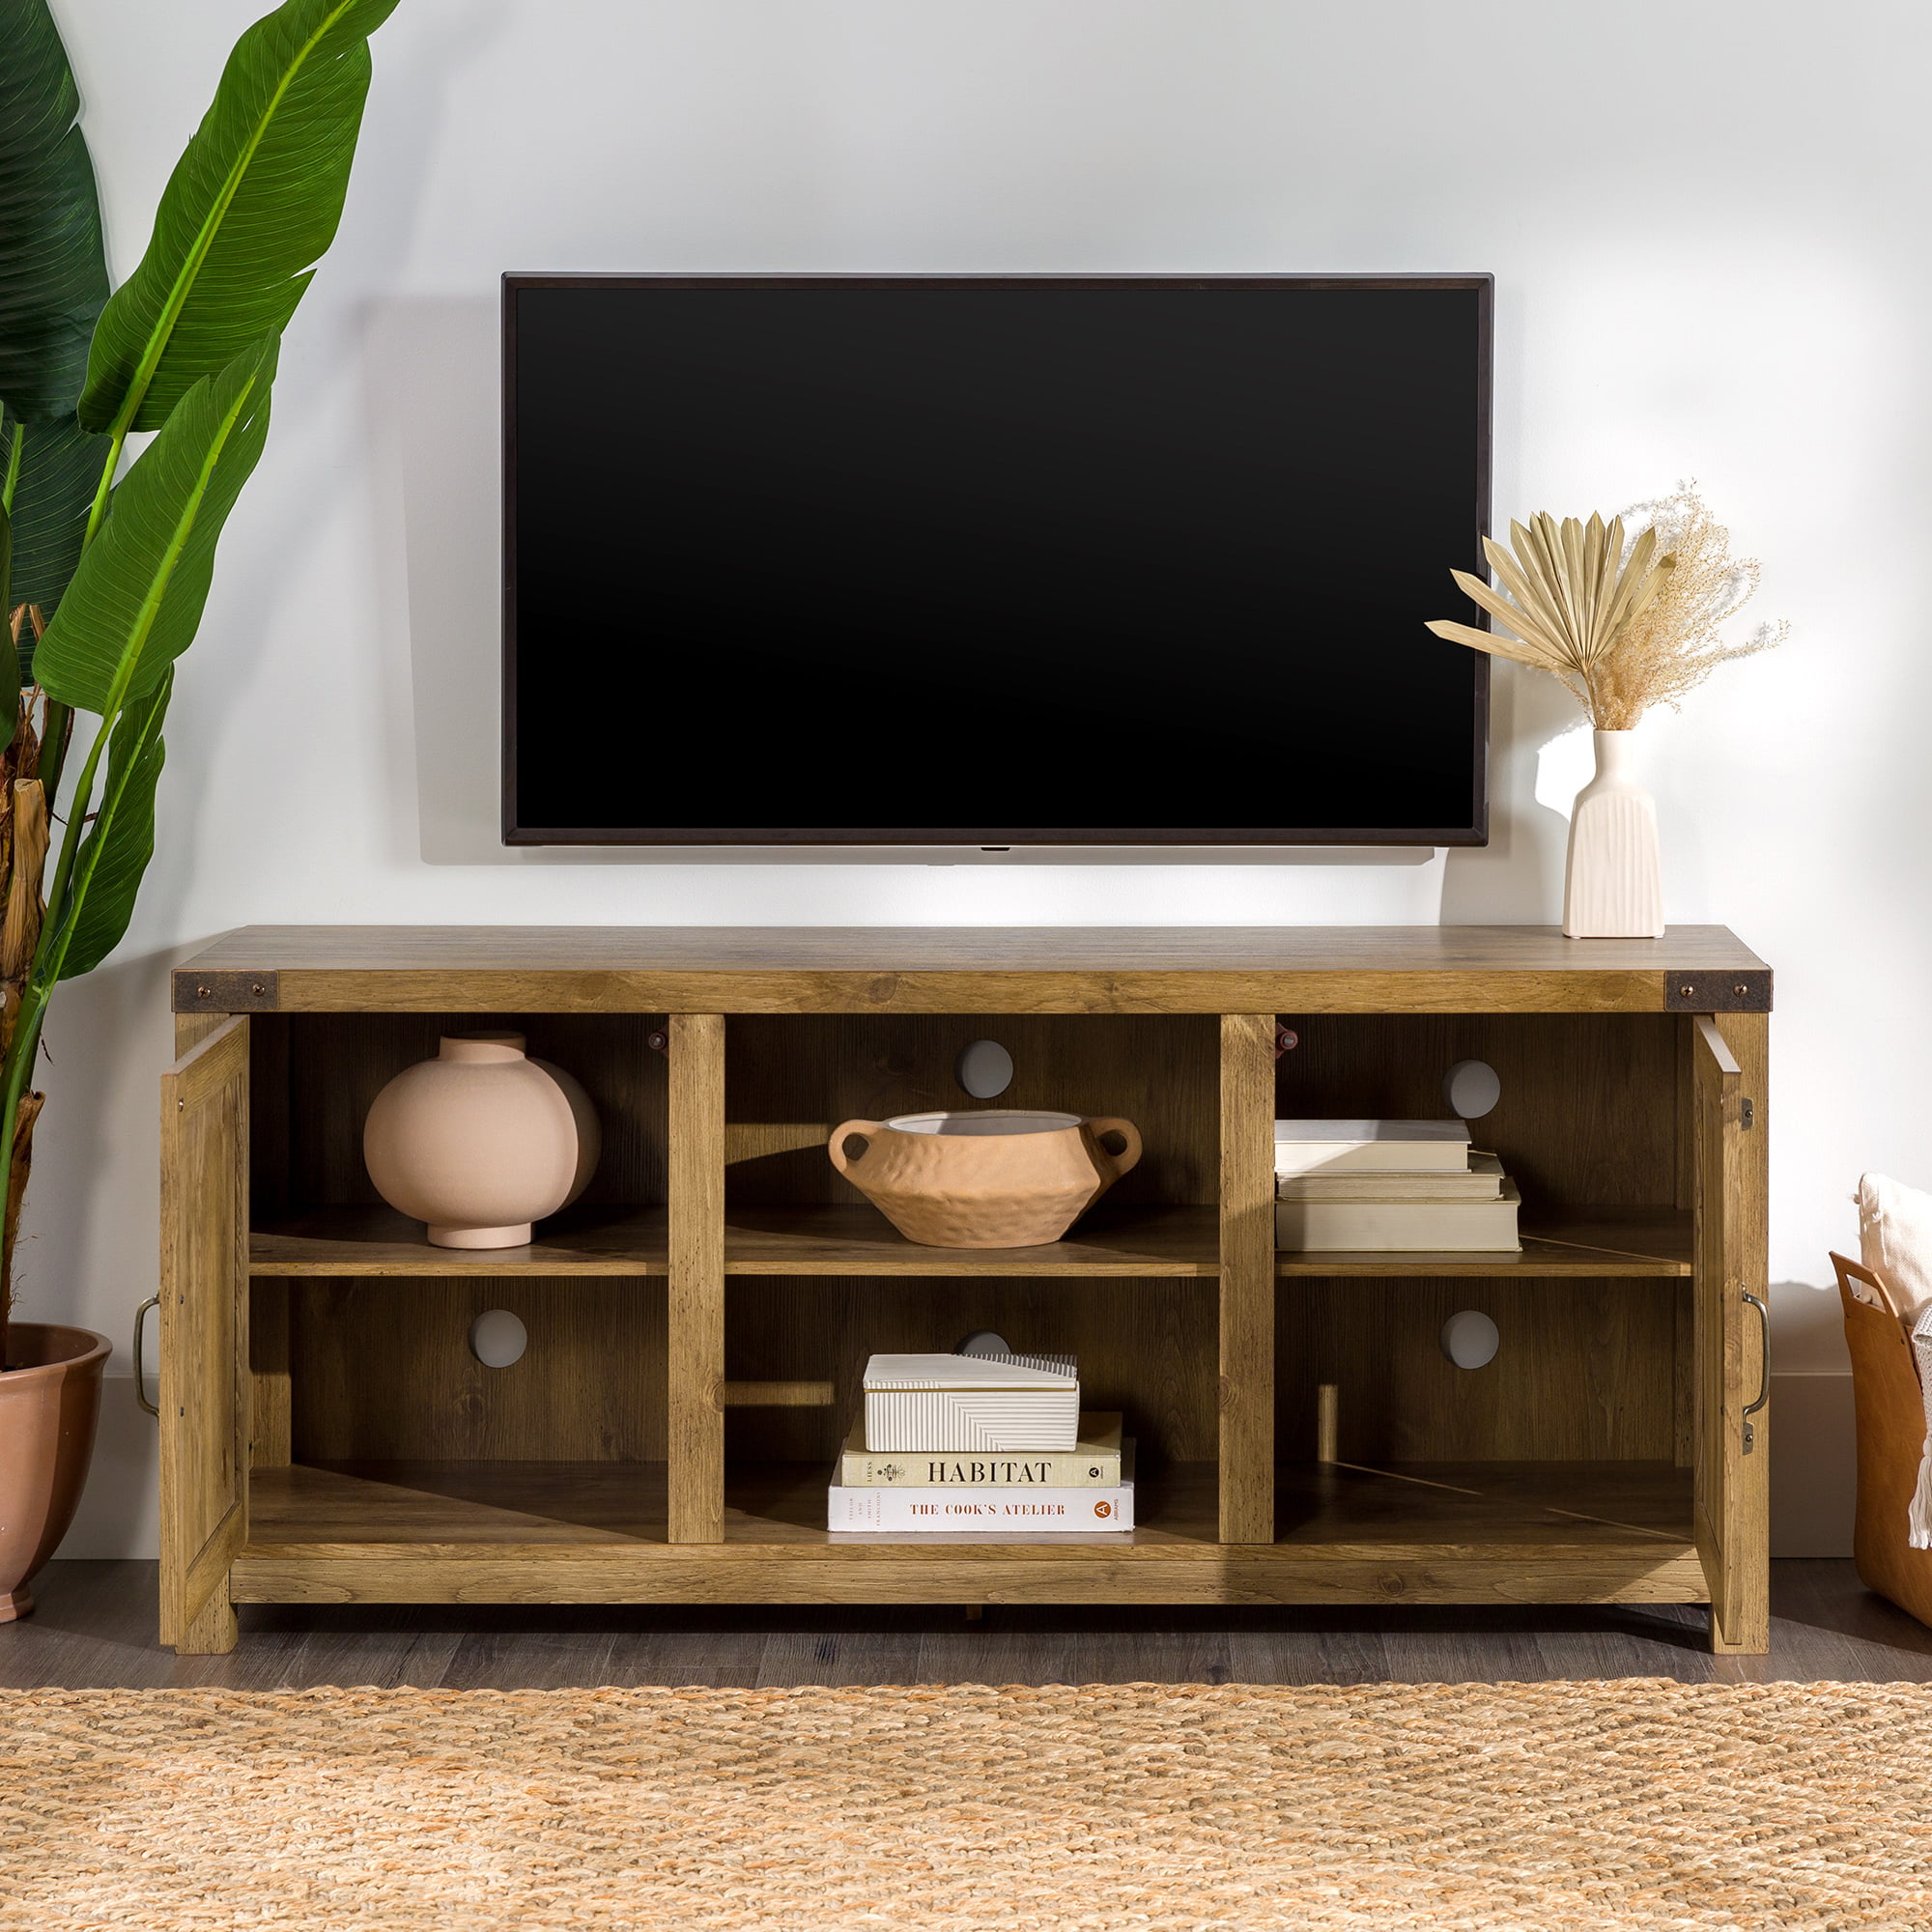 Woven Paths Modern Farmhouse Barn Door TV Stand for TVs up to 65", Barnwood $133.00 + Free Shipping